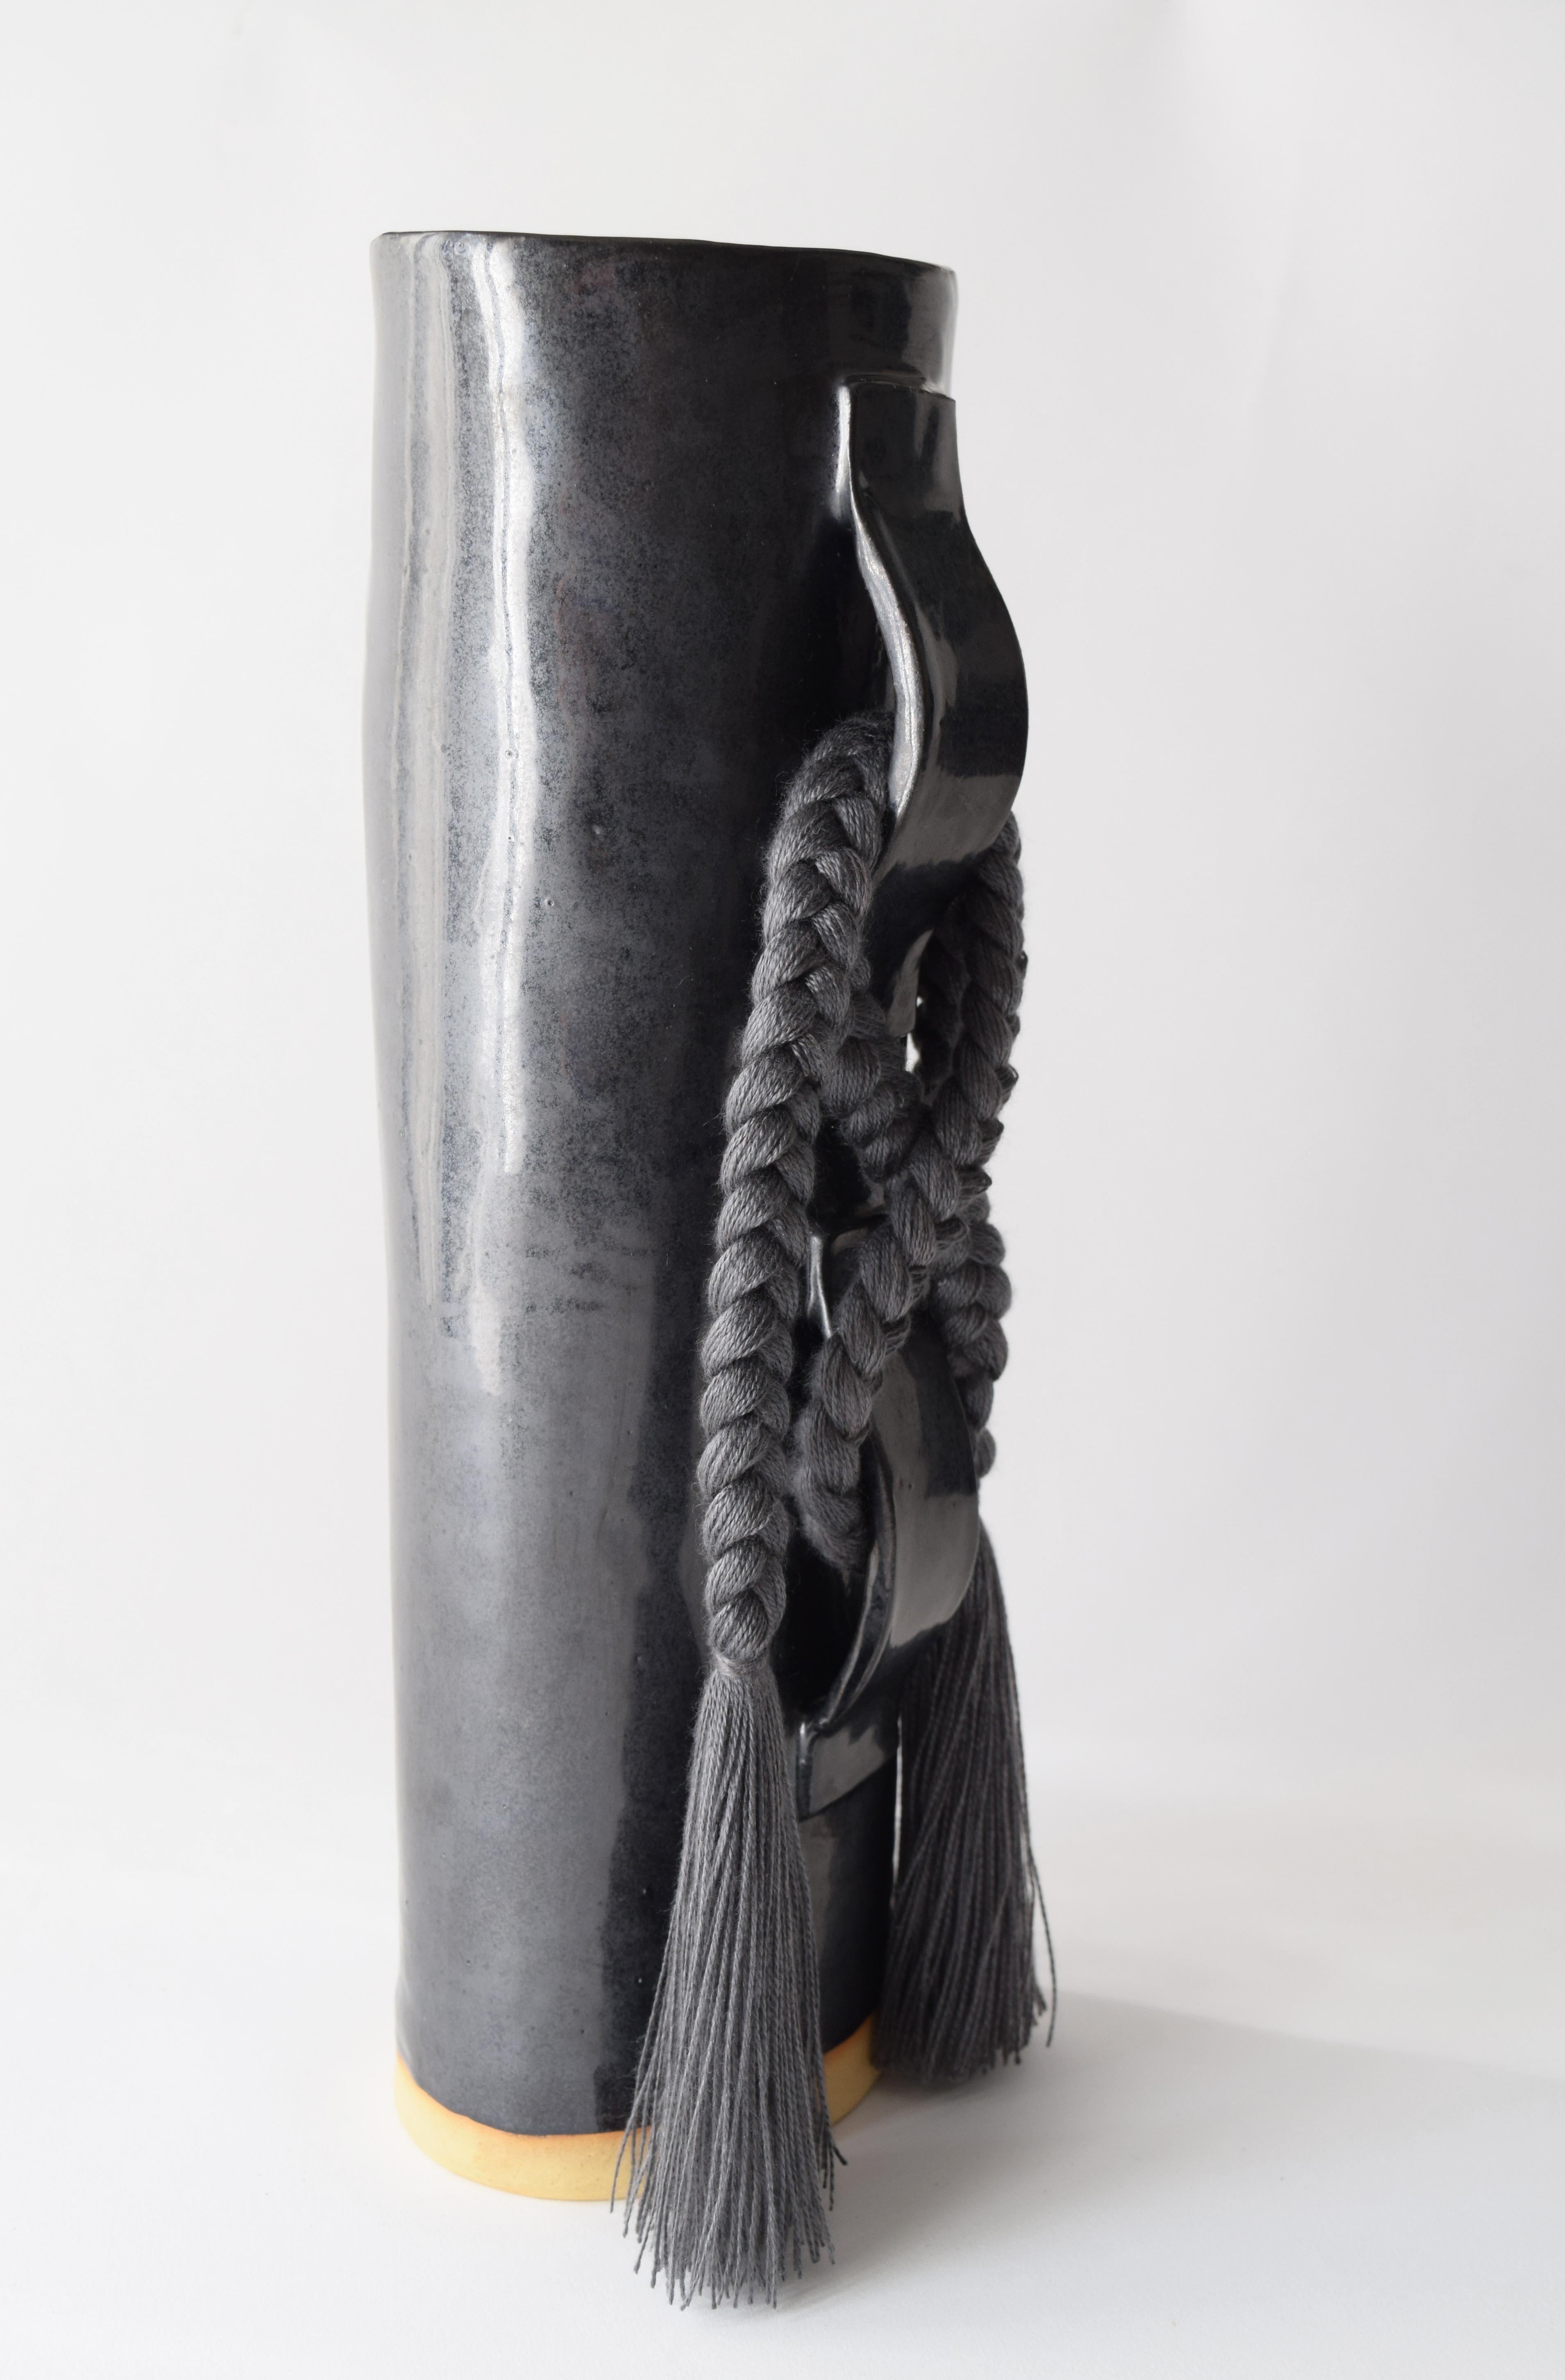 Organic Modern Handmade Ceramic Vase #696 in Black with Charcoal Tencel Braid and Fringe For Sale